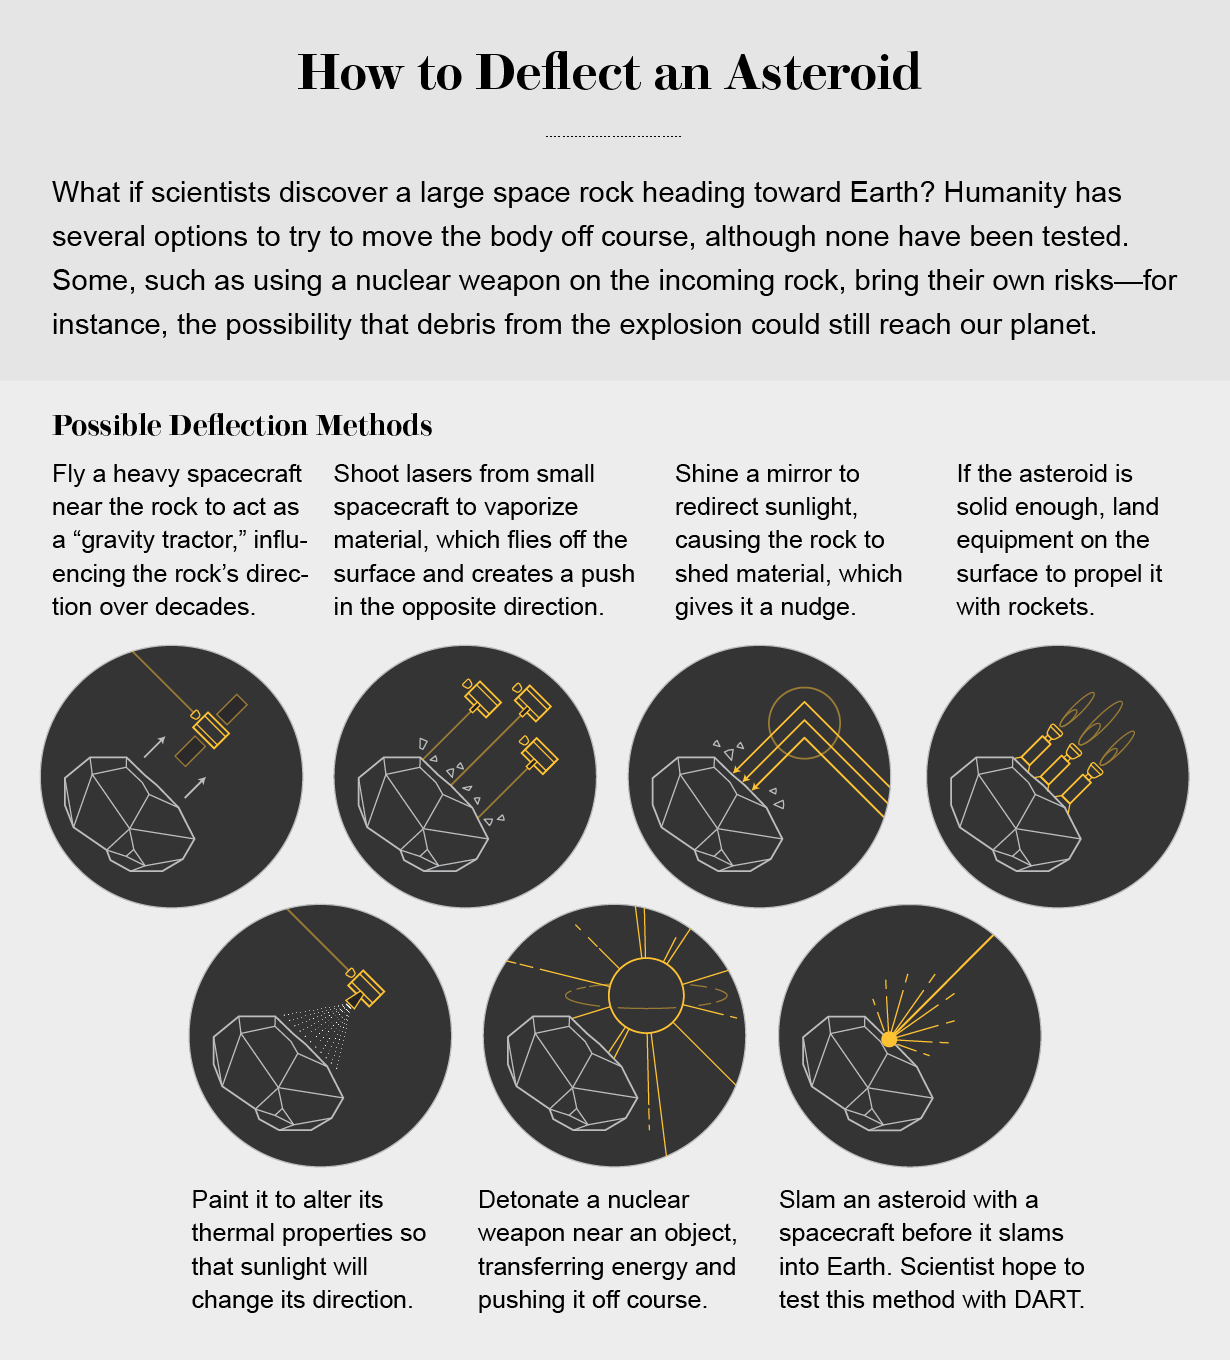 The graphic shows seven possible ways to deflect an asteroid, including the method used by the DART mission.